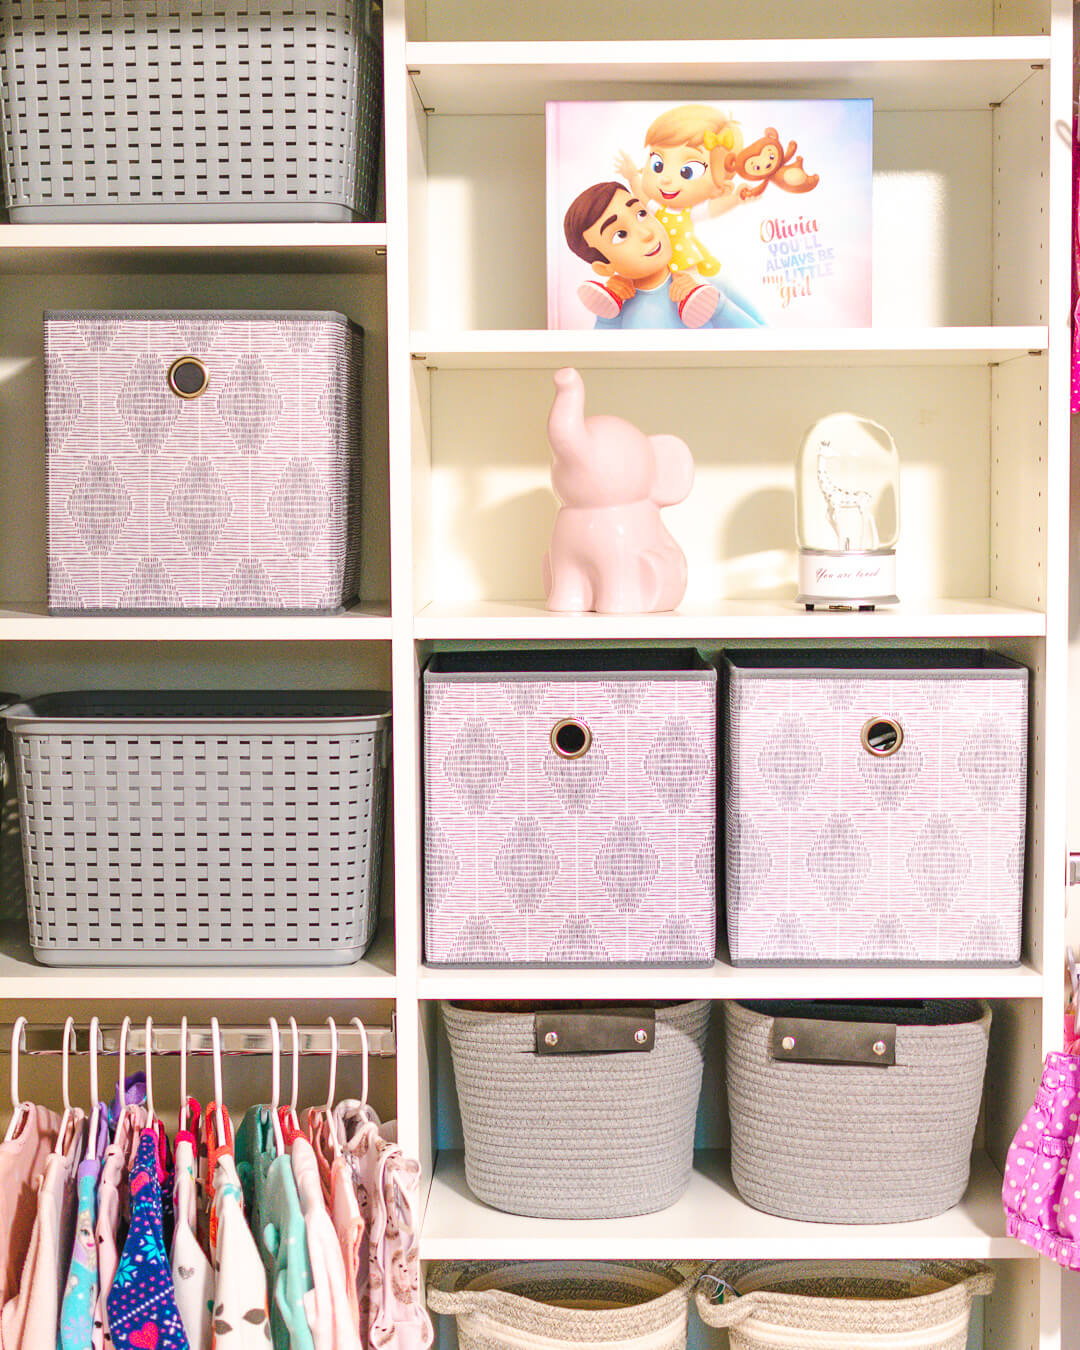 Girl white built in closet with gray baskets and pink elephant figurine.